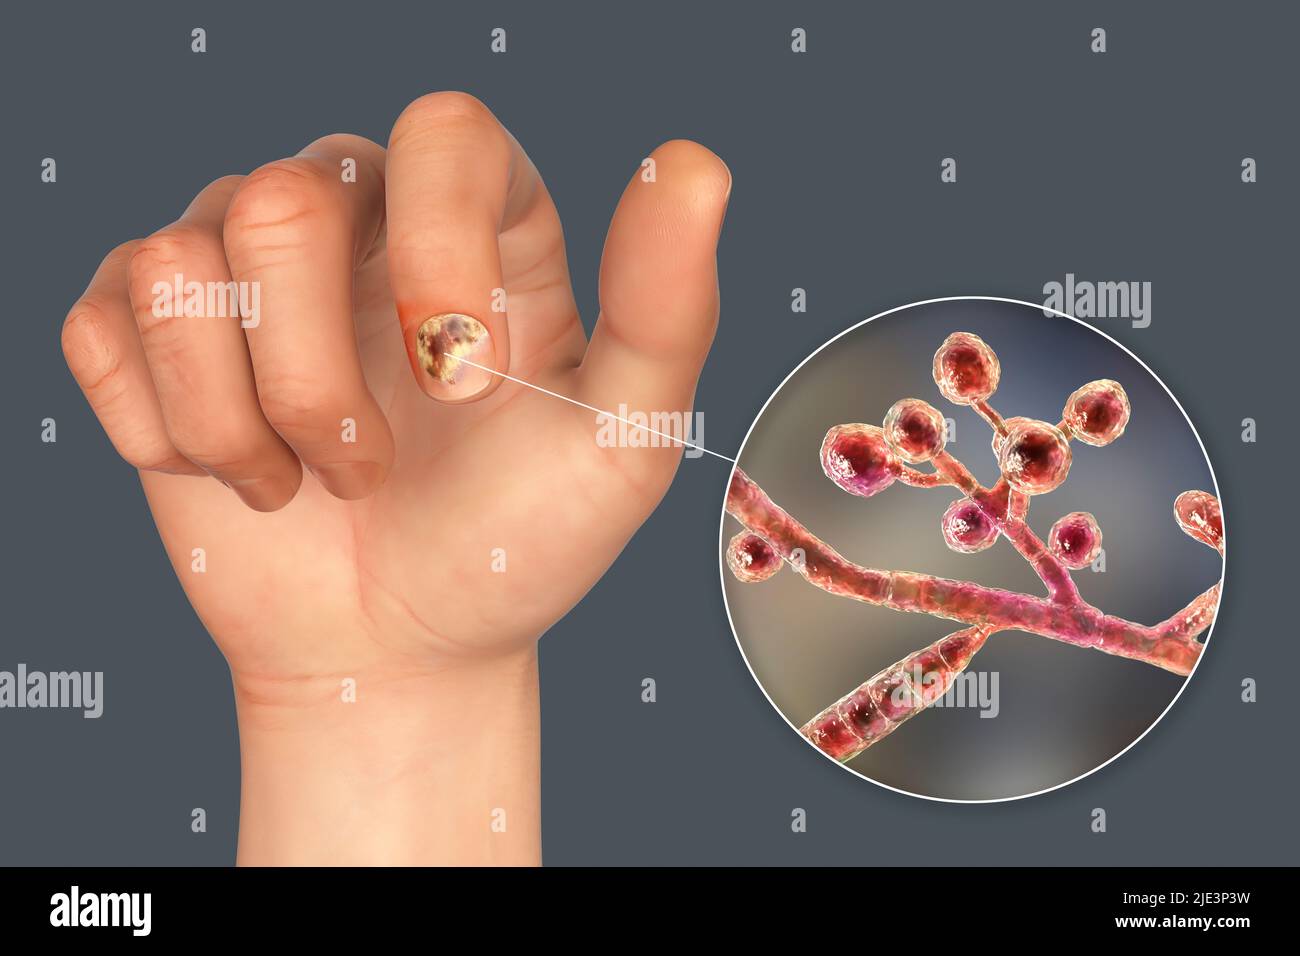 Illustration of a fungal nail infection showing human hand with onychomycosis and close-up view of Trichopyton mentagrophytes fungi, one of the causat Stock Photo